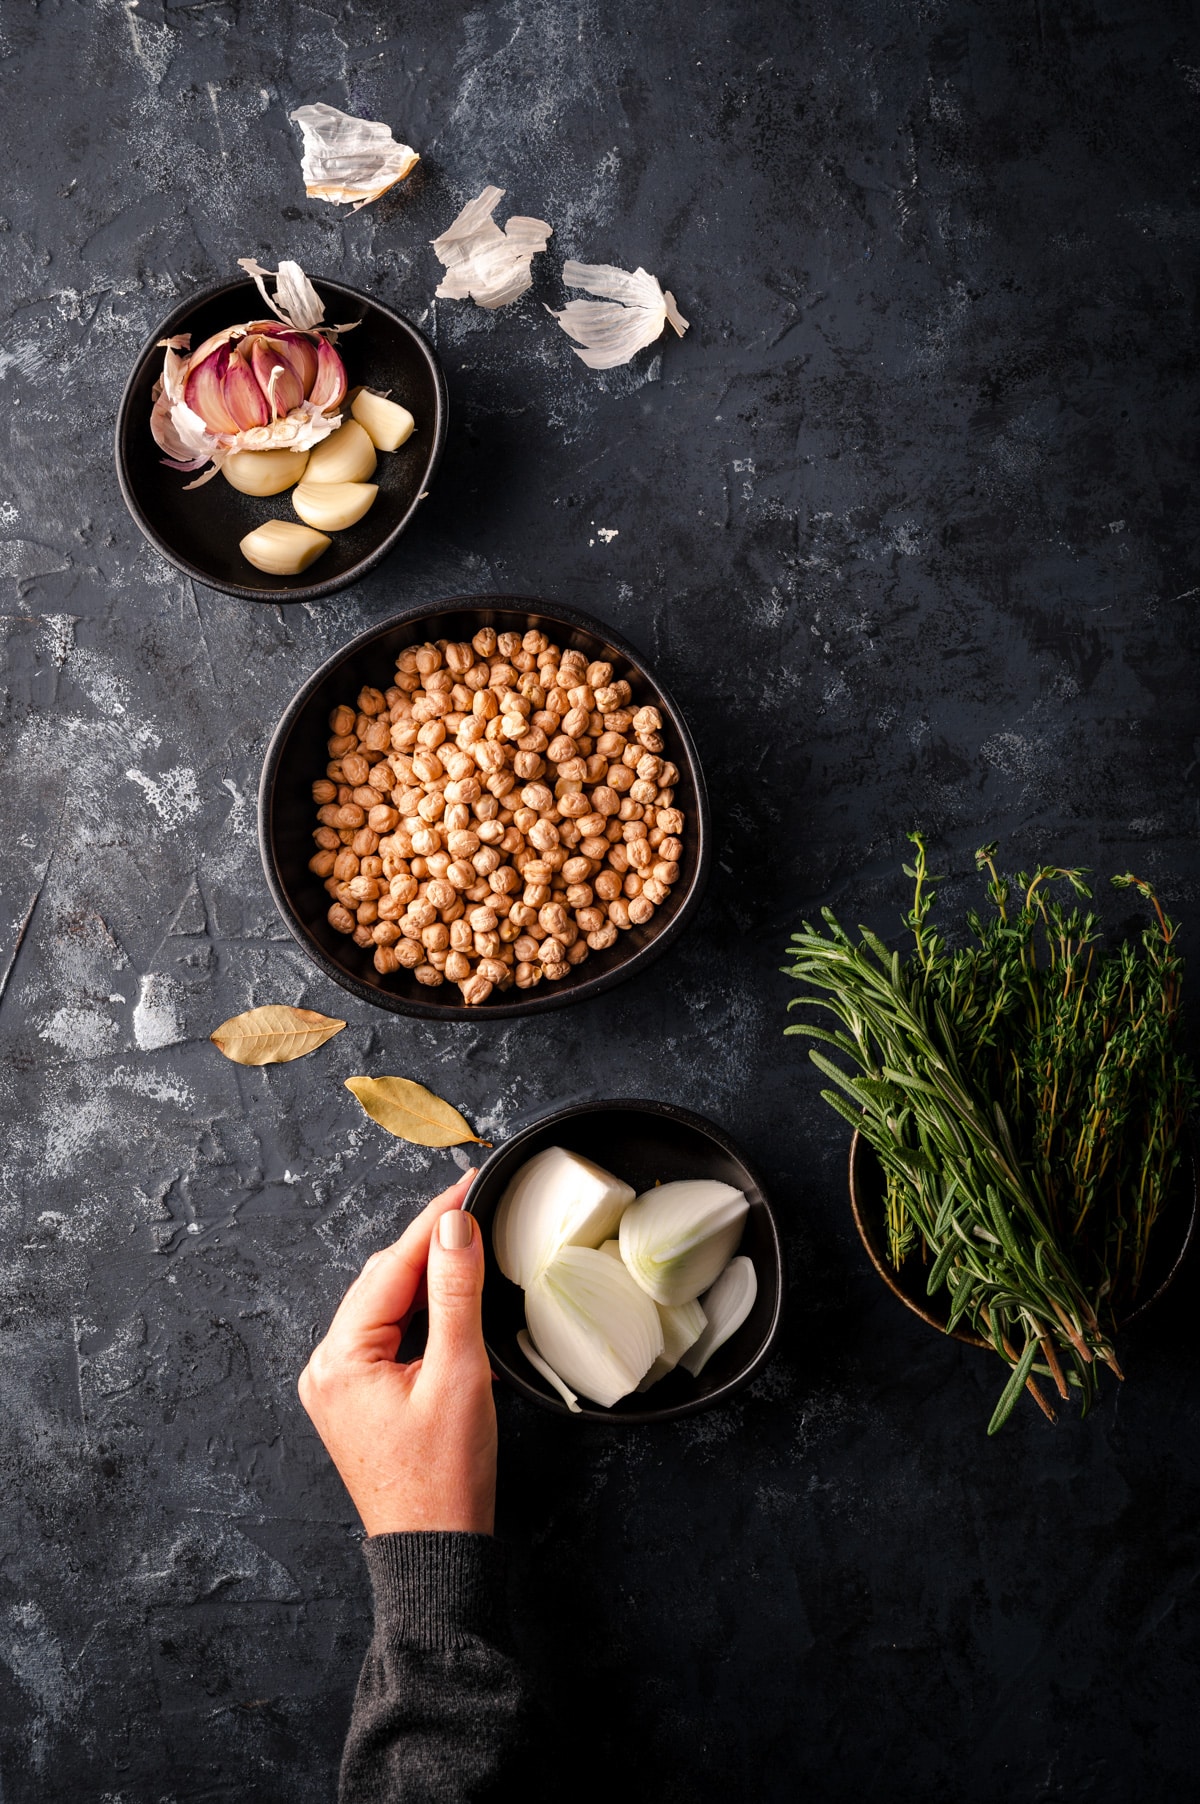 Ingredients for cooking chickpeas.